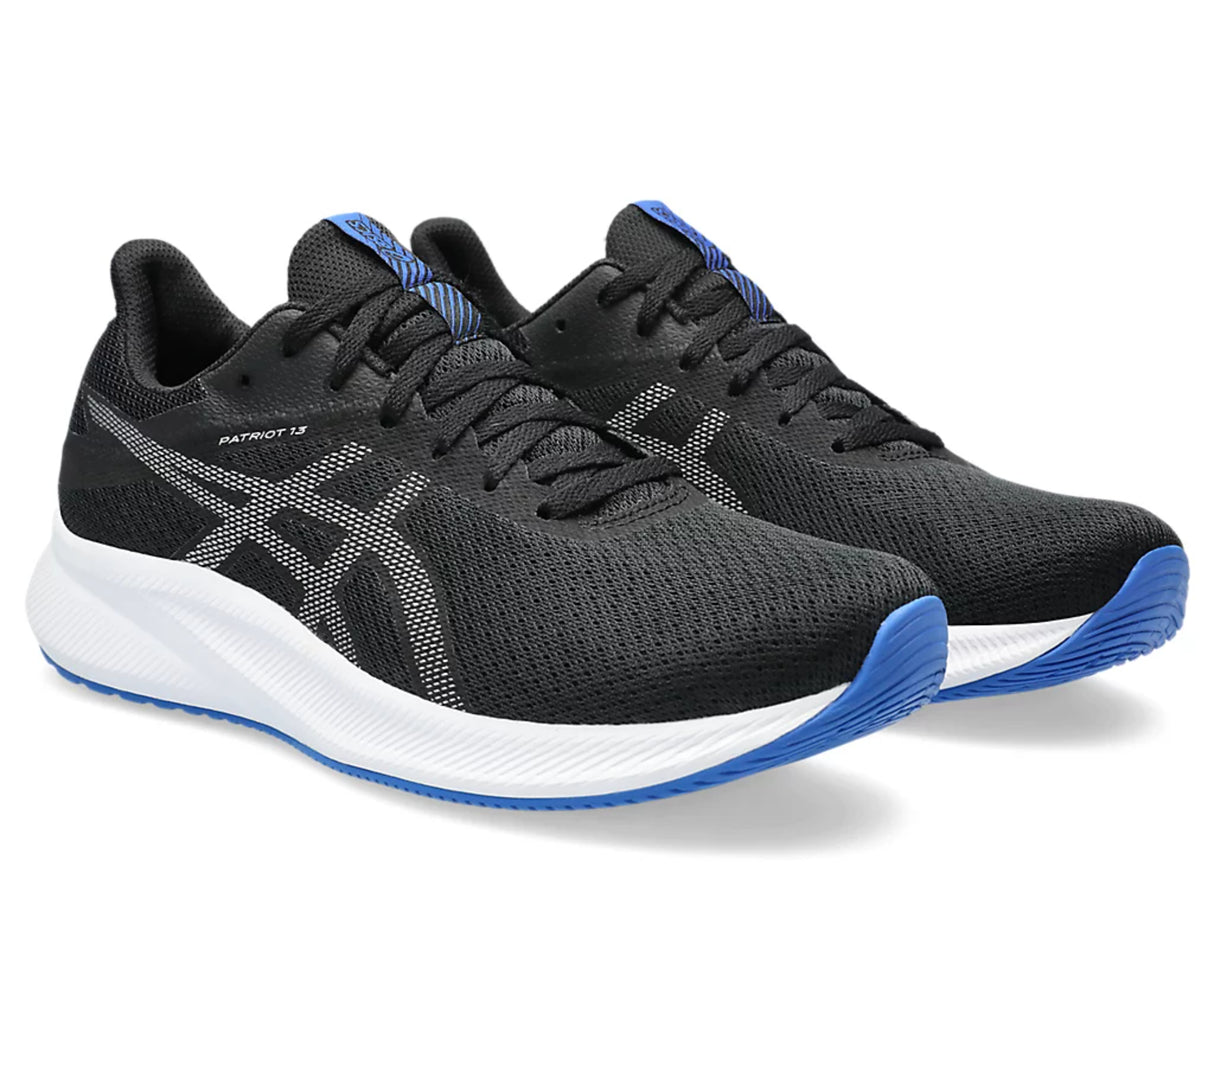 Asics PATRIOT 13 Sports Running Shoes Black/Pure Silver 1011B485.005